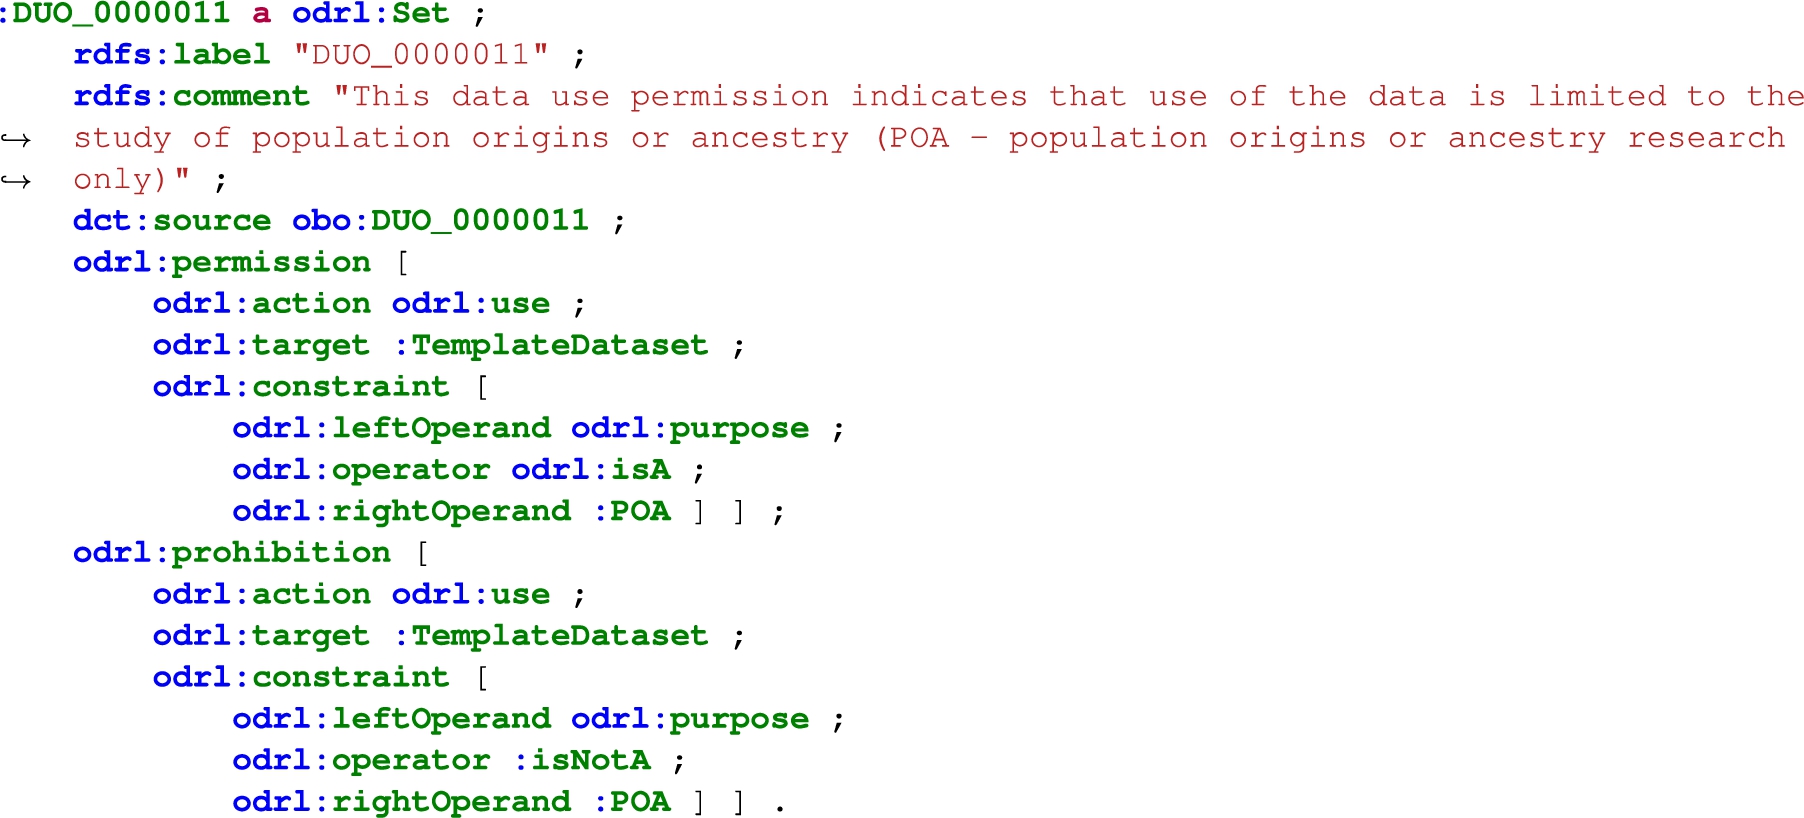 An odrl:Set representing DUO_0000011 regarding Population Origins or Ancestry research (POA). The permission and prohibition over the same purpose is based on interpretation of the phrase “is limited to” to indicate use if permitted only for that research